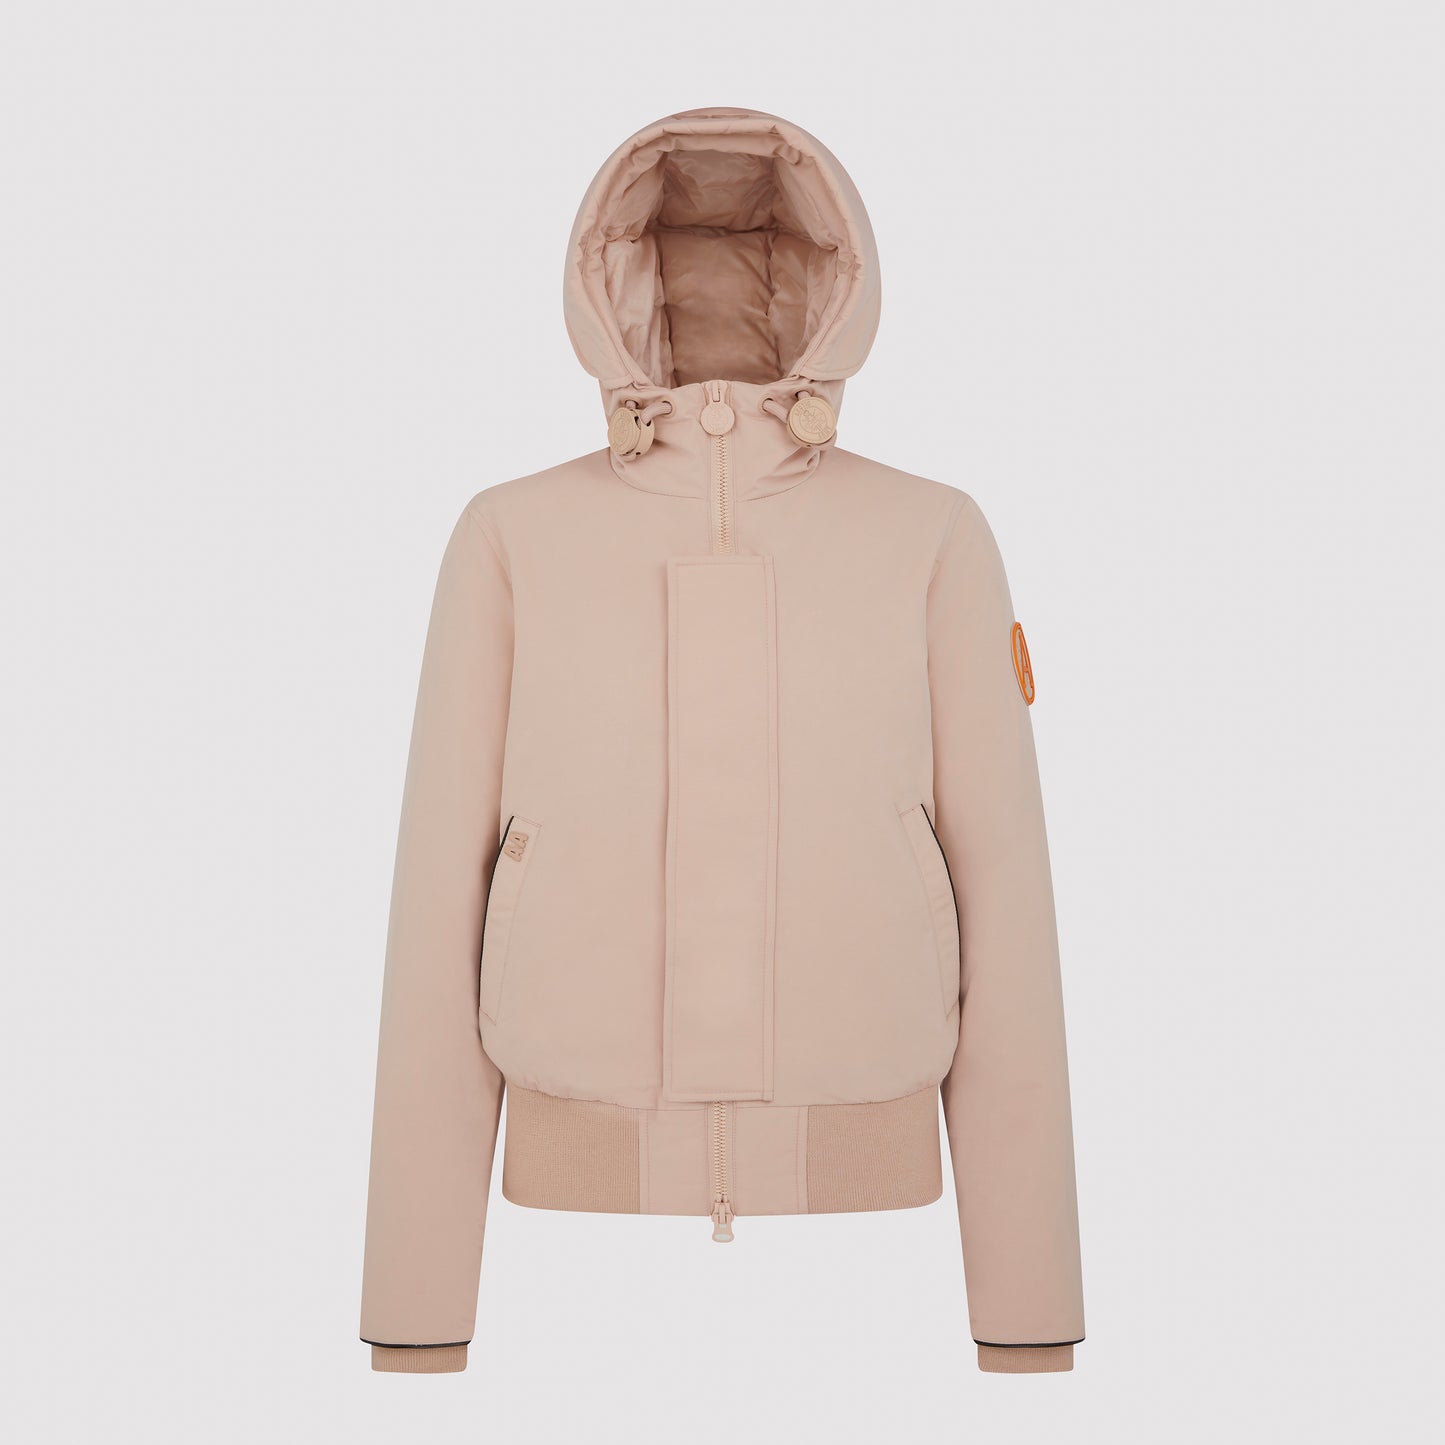 Women's Tailored Bomber in Clay